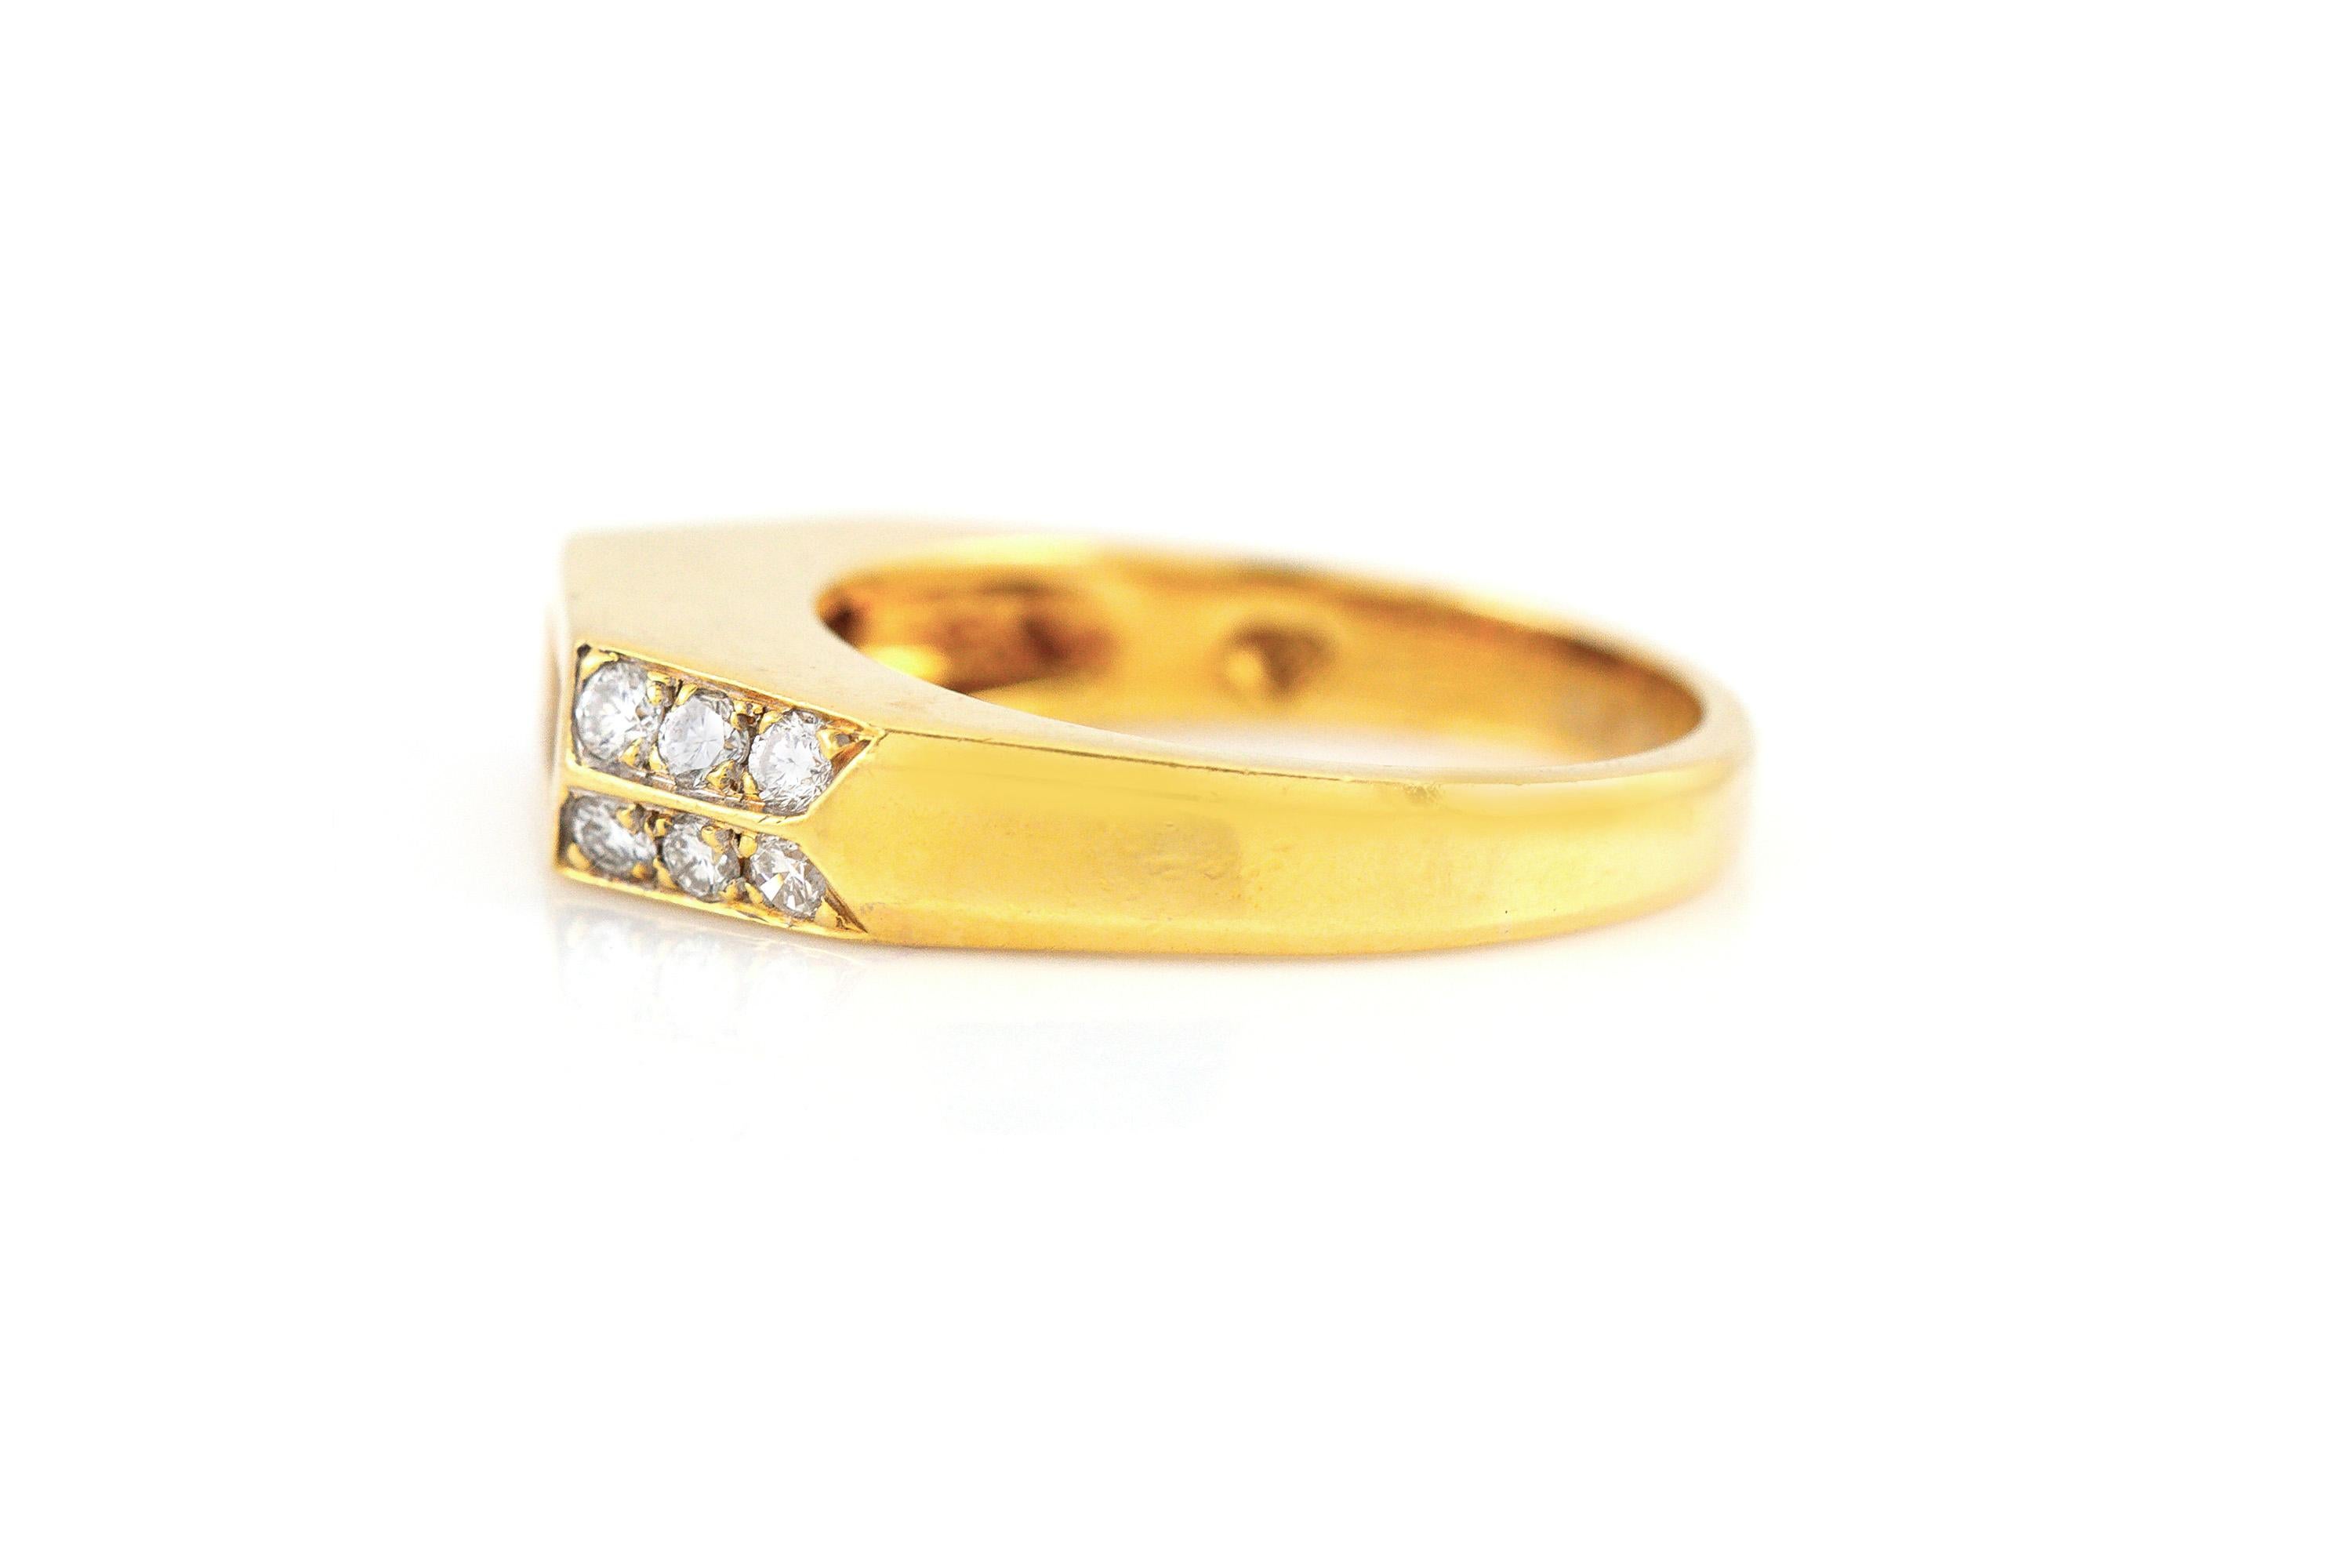 Finely crafted in 18k yellow gold with 4 Baguette and 12 Round brilliant cut diamonds weighing approximately a total of 1.20 carats.
Size 9 1/4, resizable